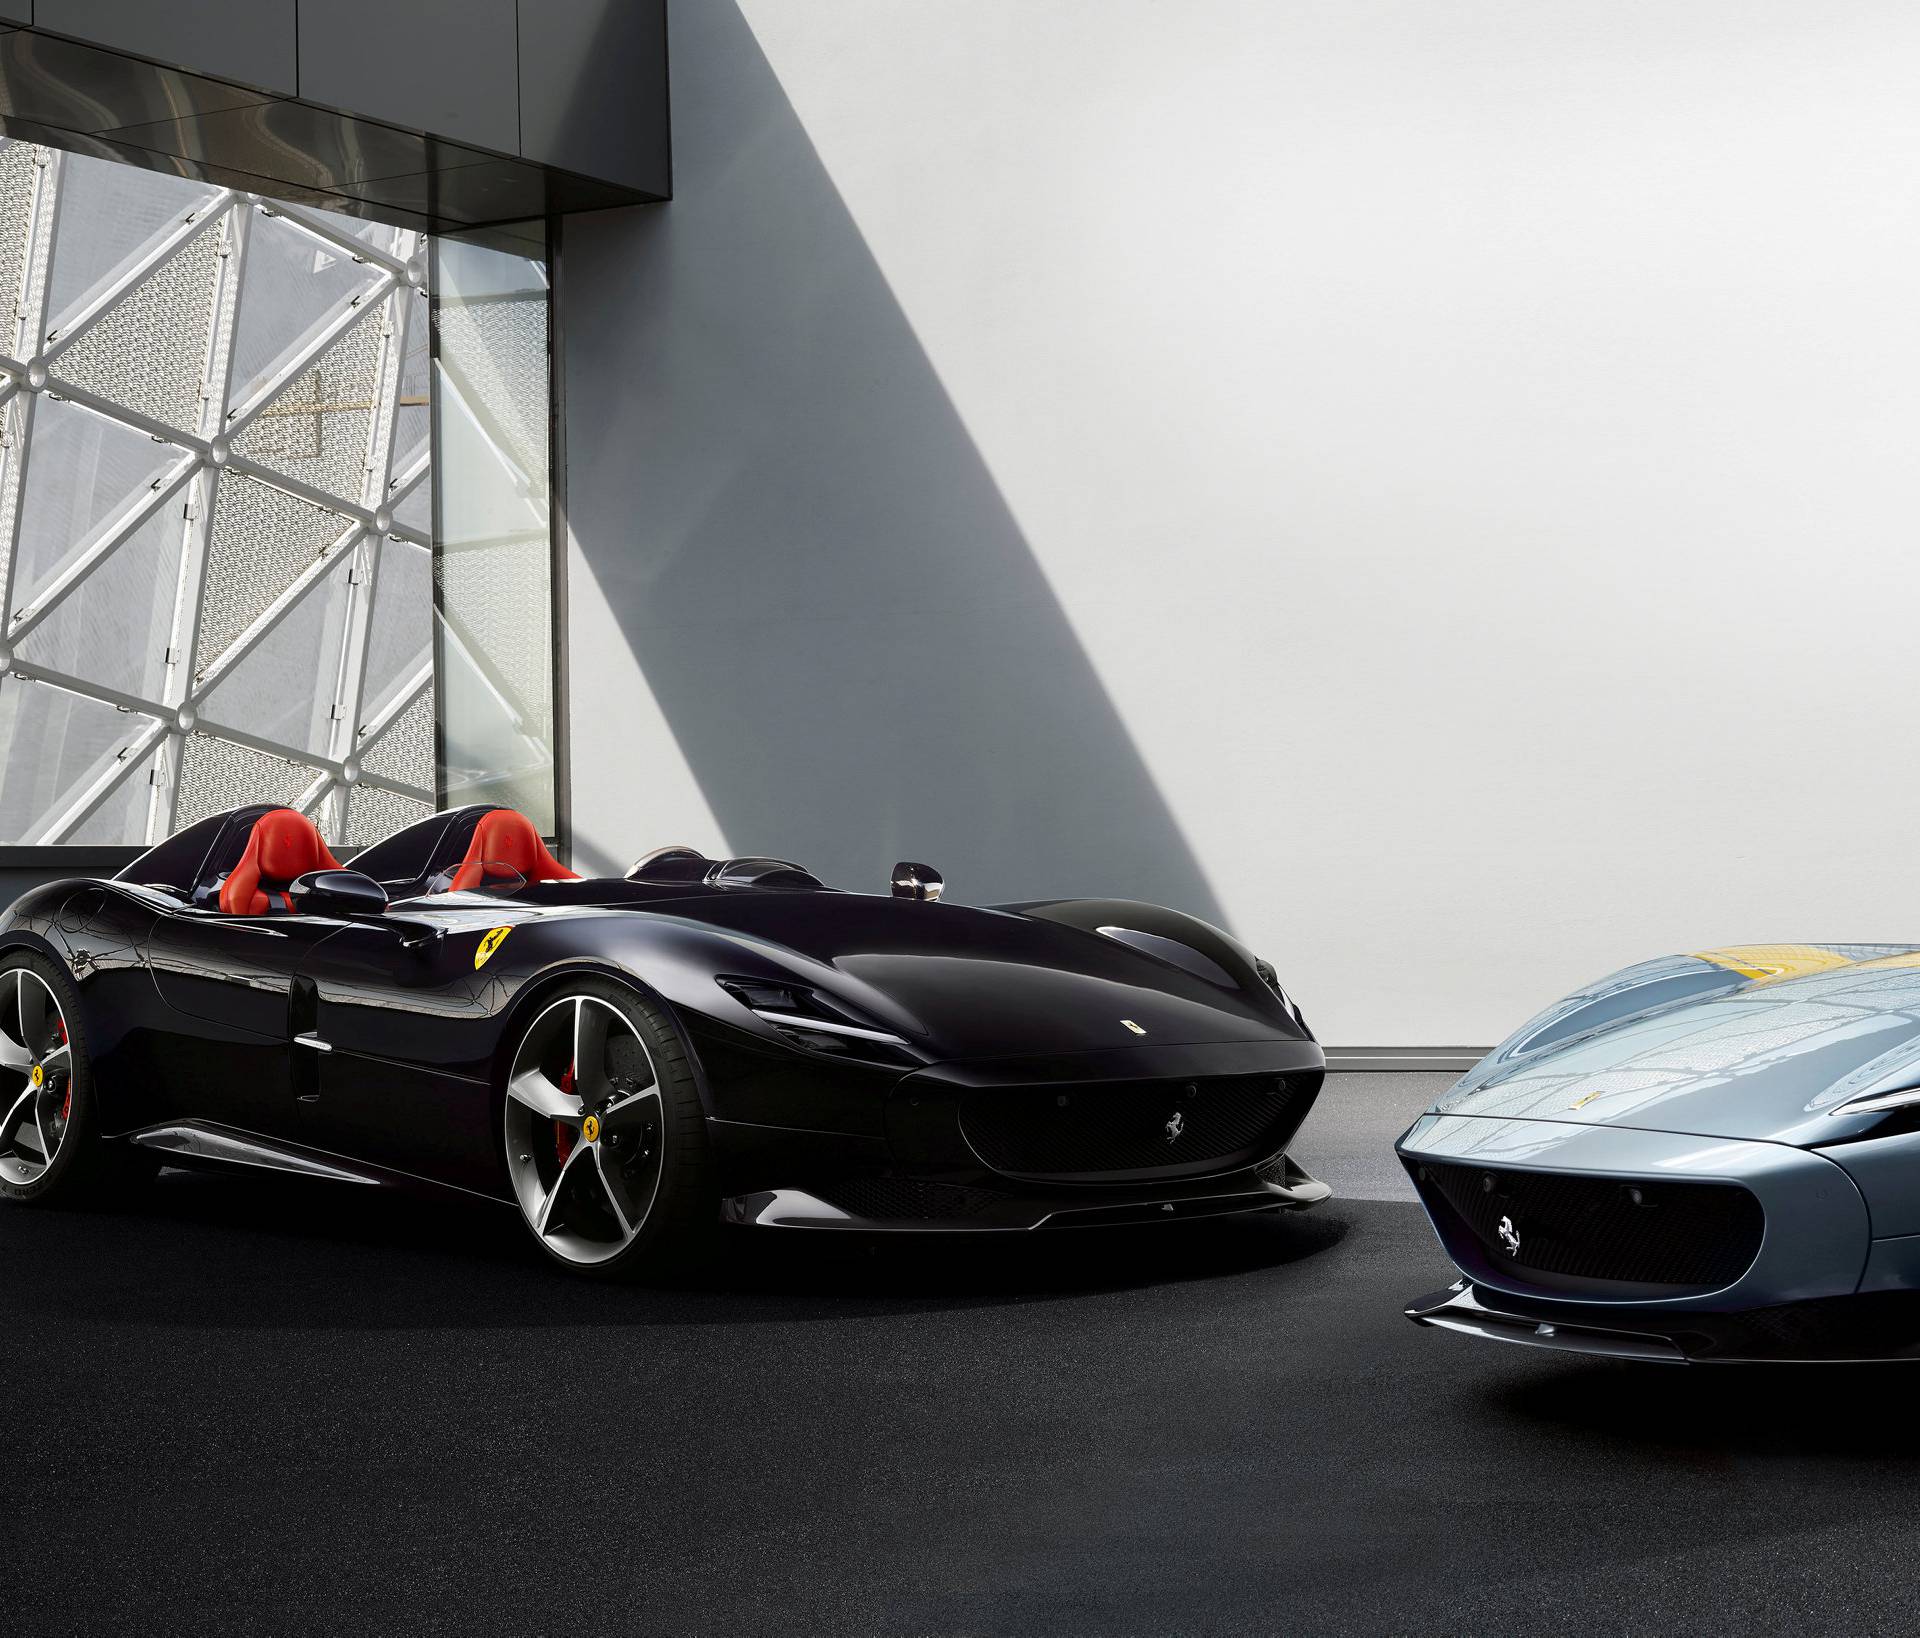 Ferrari's new Monza SP1 and SP2 cars are seen in this picture released by Ferrari press office during a meeting in Maranello